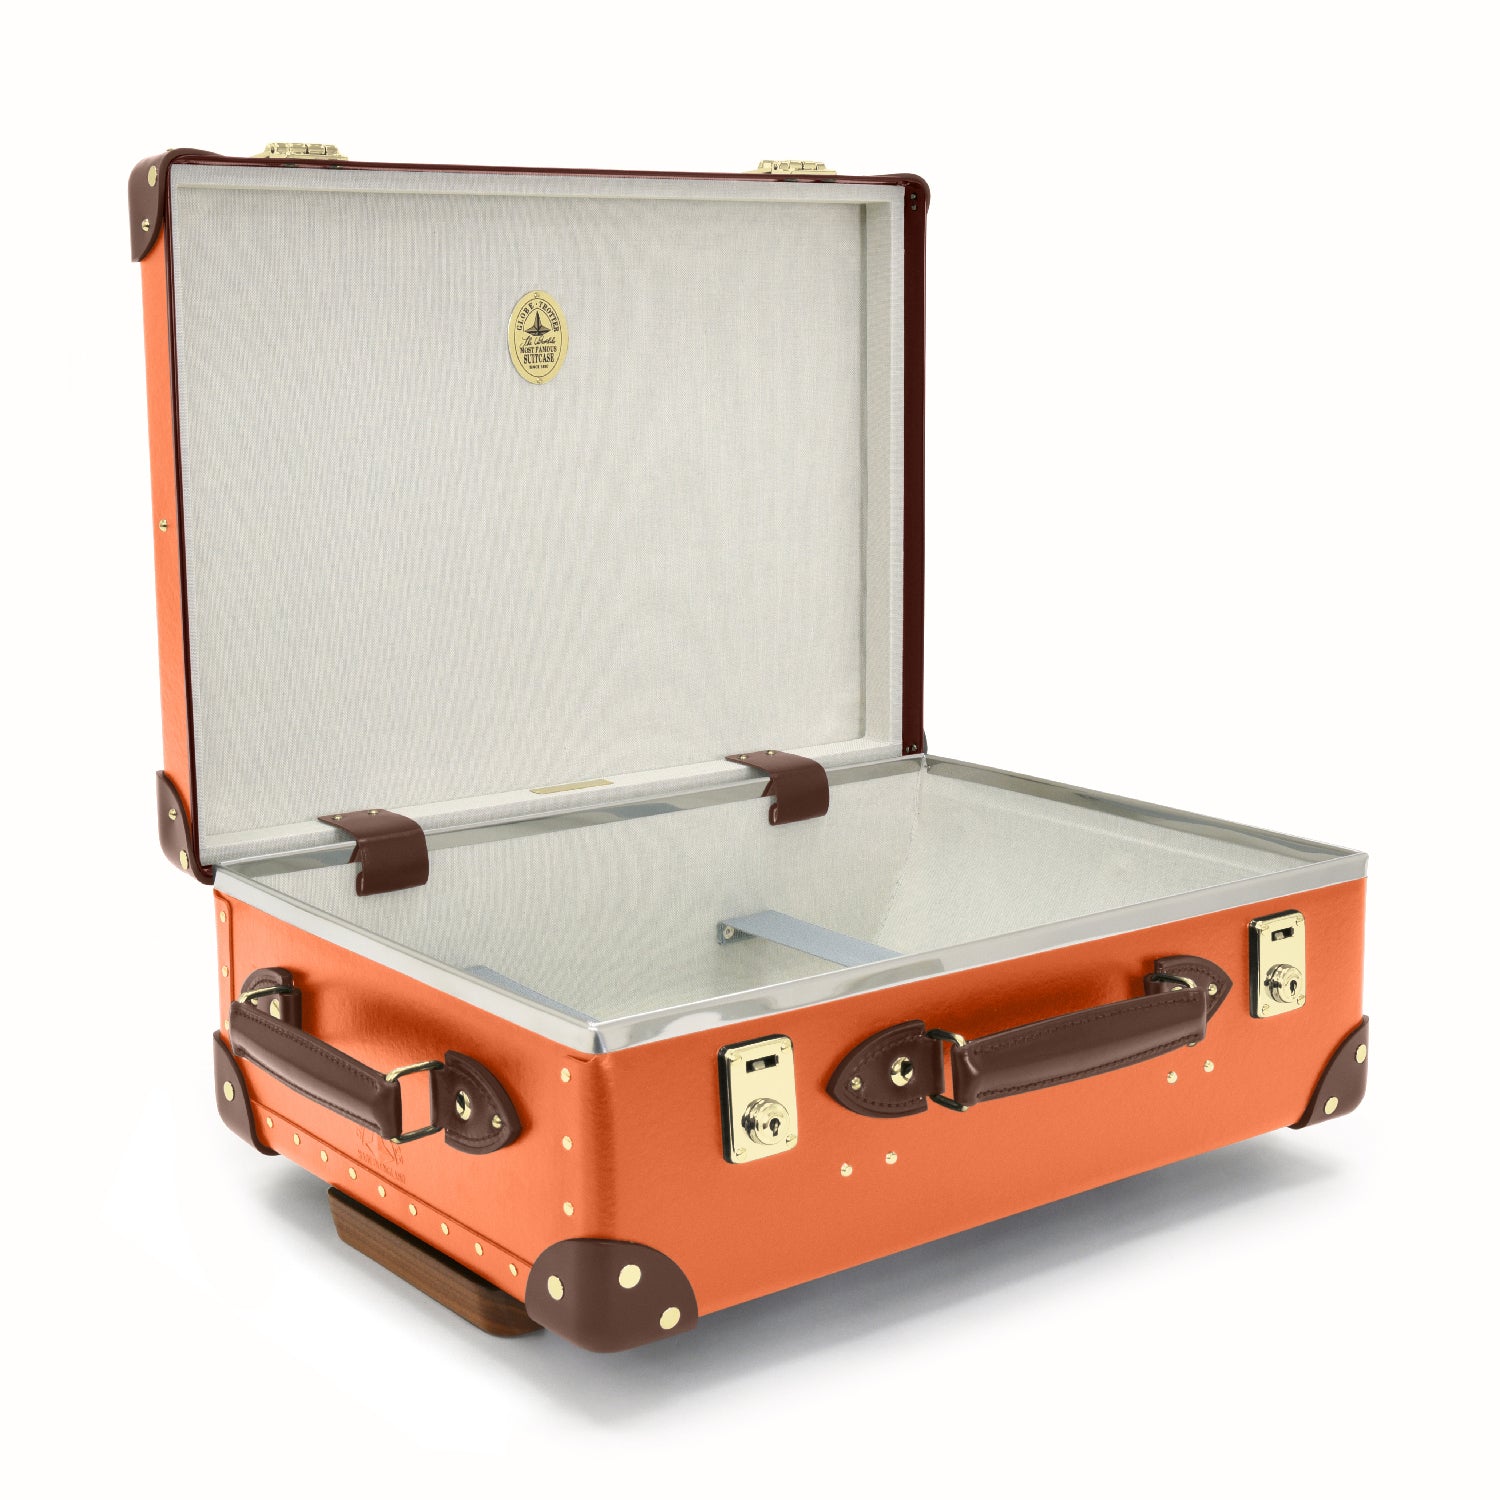 Centenary · Small Carry-On | Marmalade/Brown - GLOBE-TROTTER